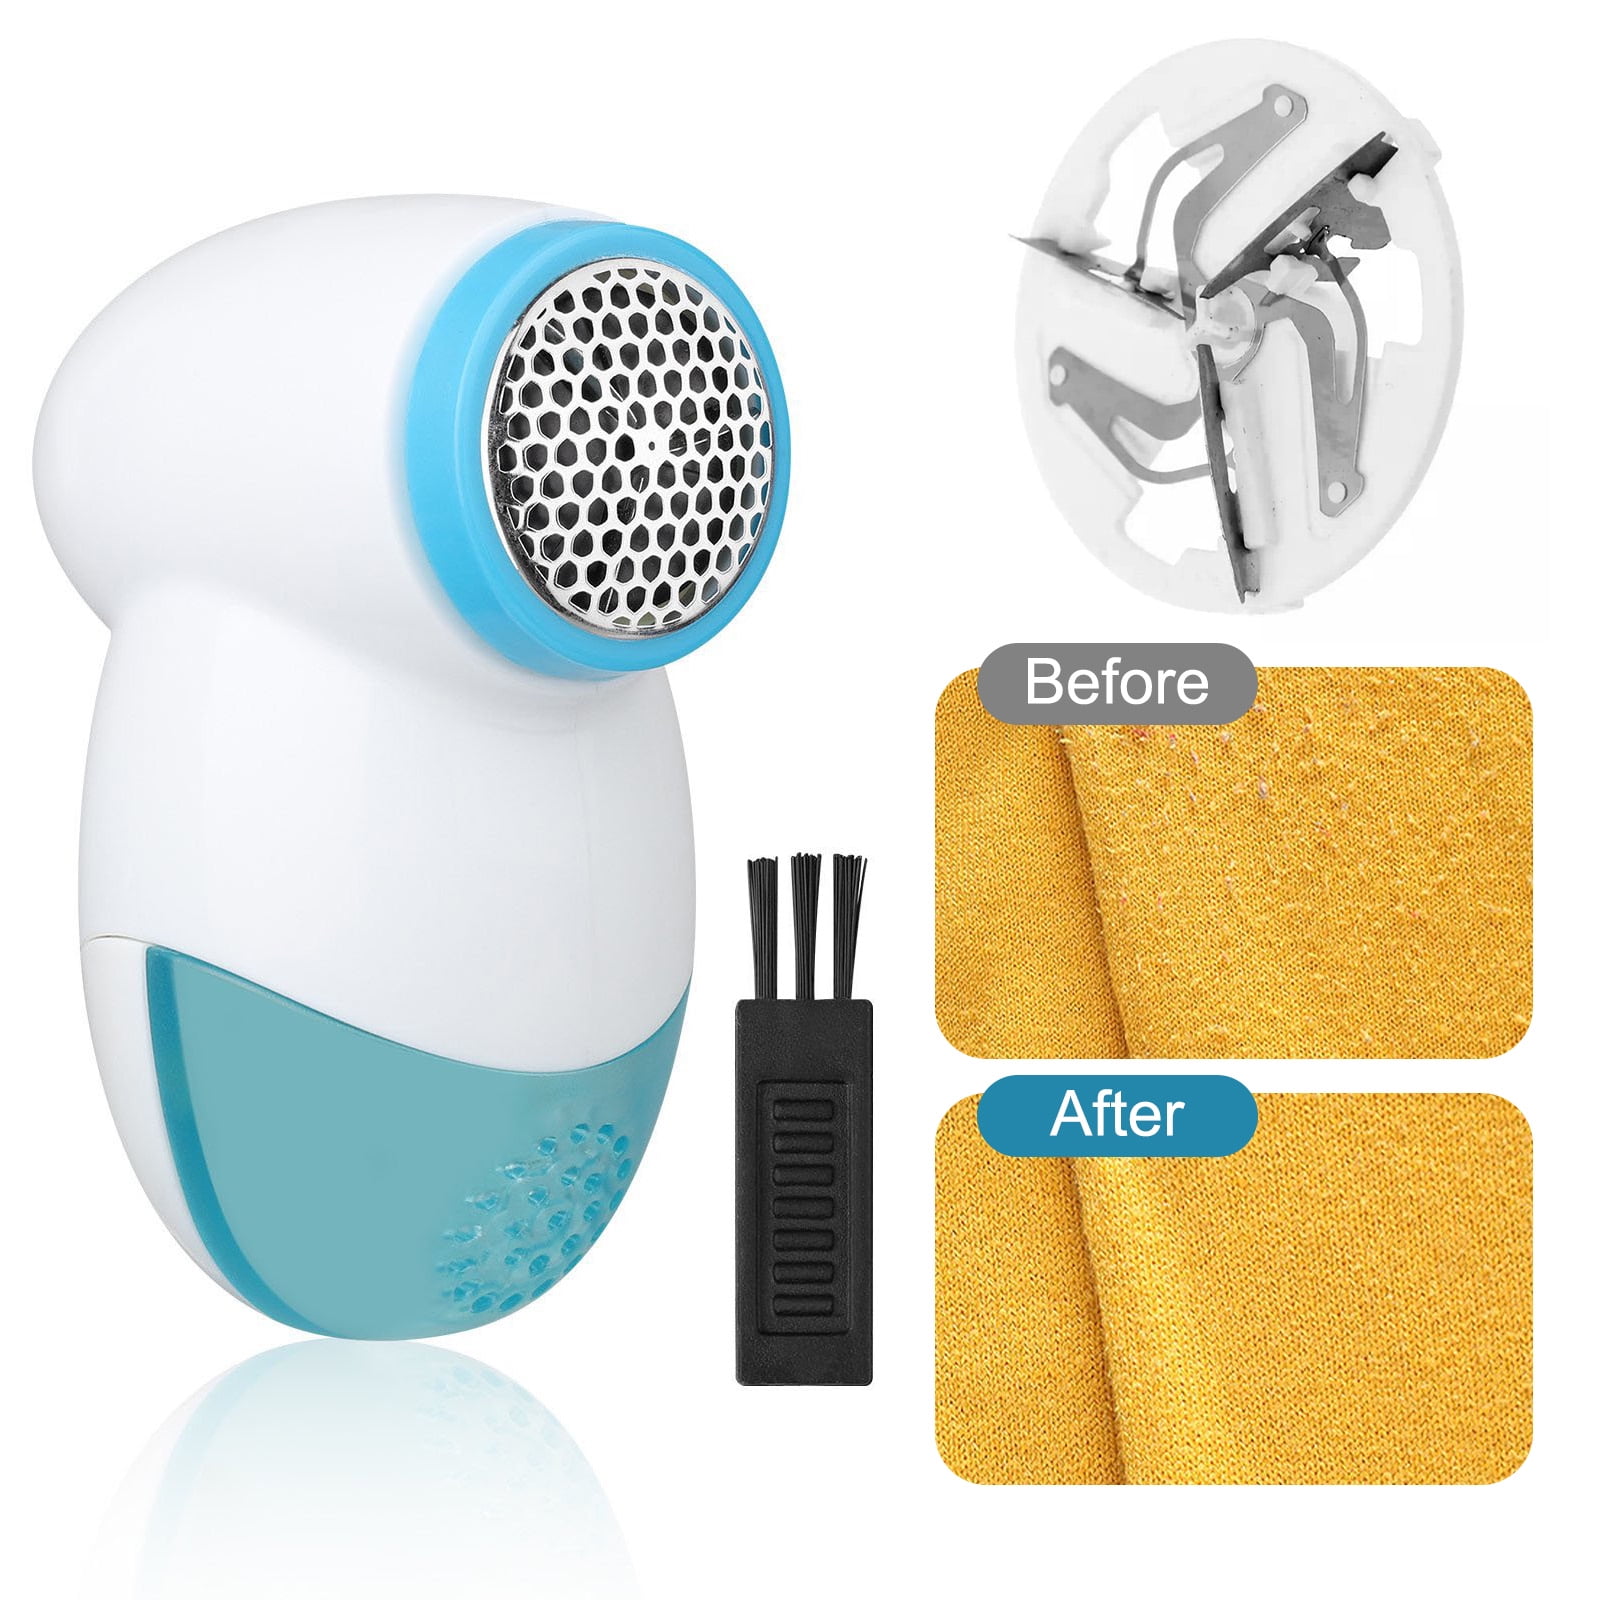 EEEkit Electric Lint Remover with 3-Leaf Blades, Portable Fabric Shaver Clothing Sweater Defuzzer Trimmer, Efficient Sweater Lint Pill -